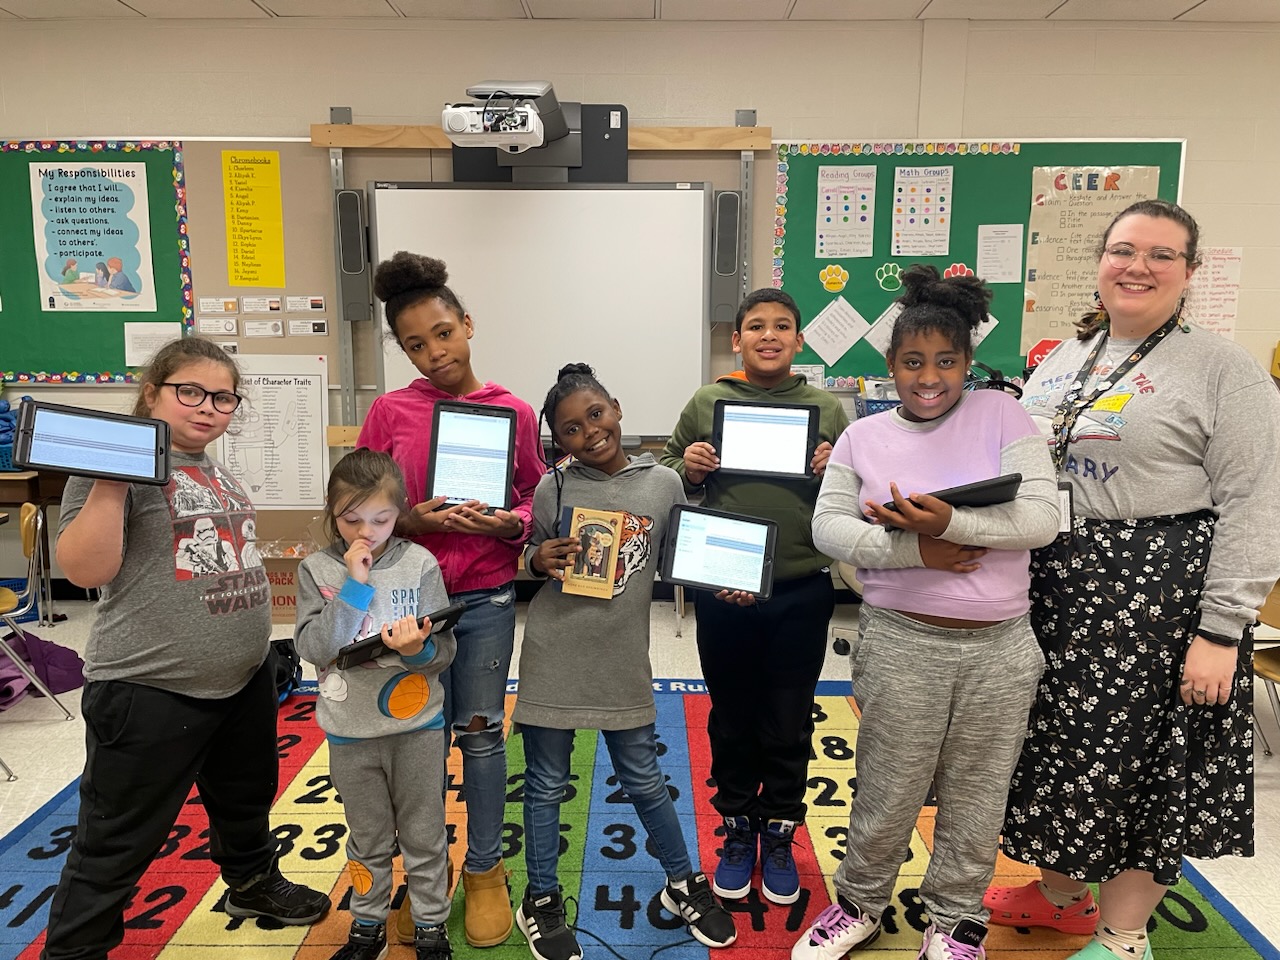 This is a photo of a group of Delaware students holding their digital devices or books and smiling at the camera.